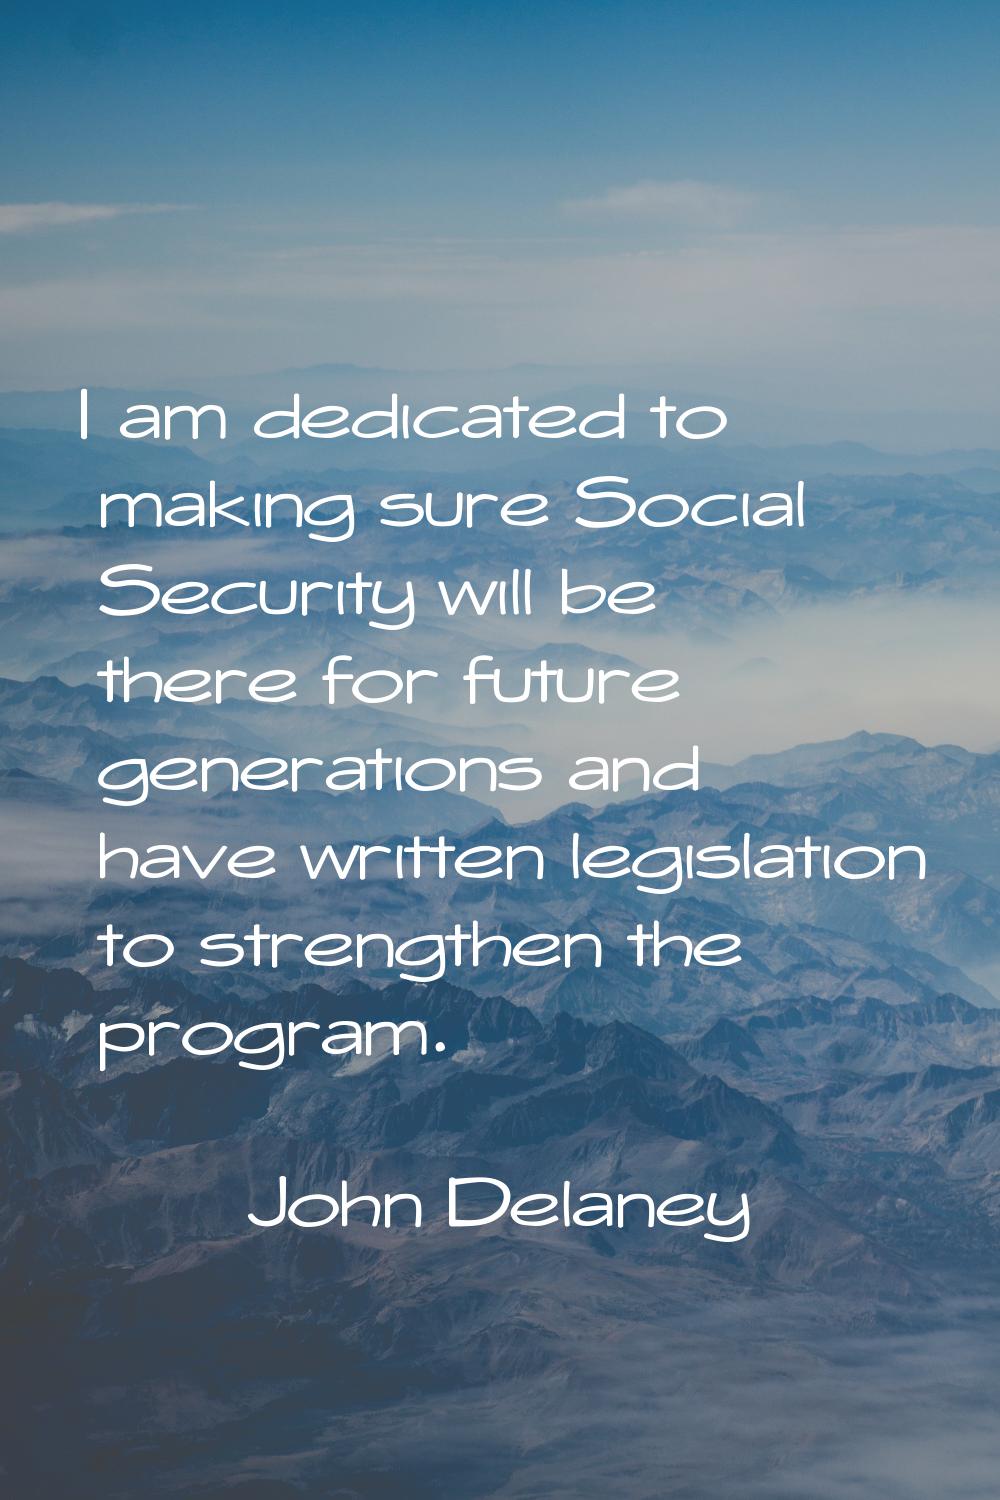 I am dedicated to making sure Social Security will be there for future generations and have written